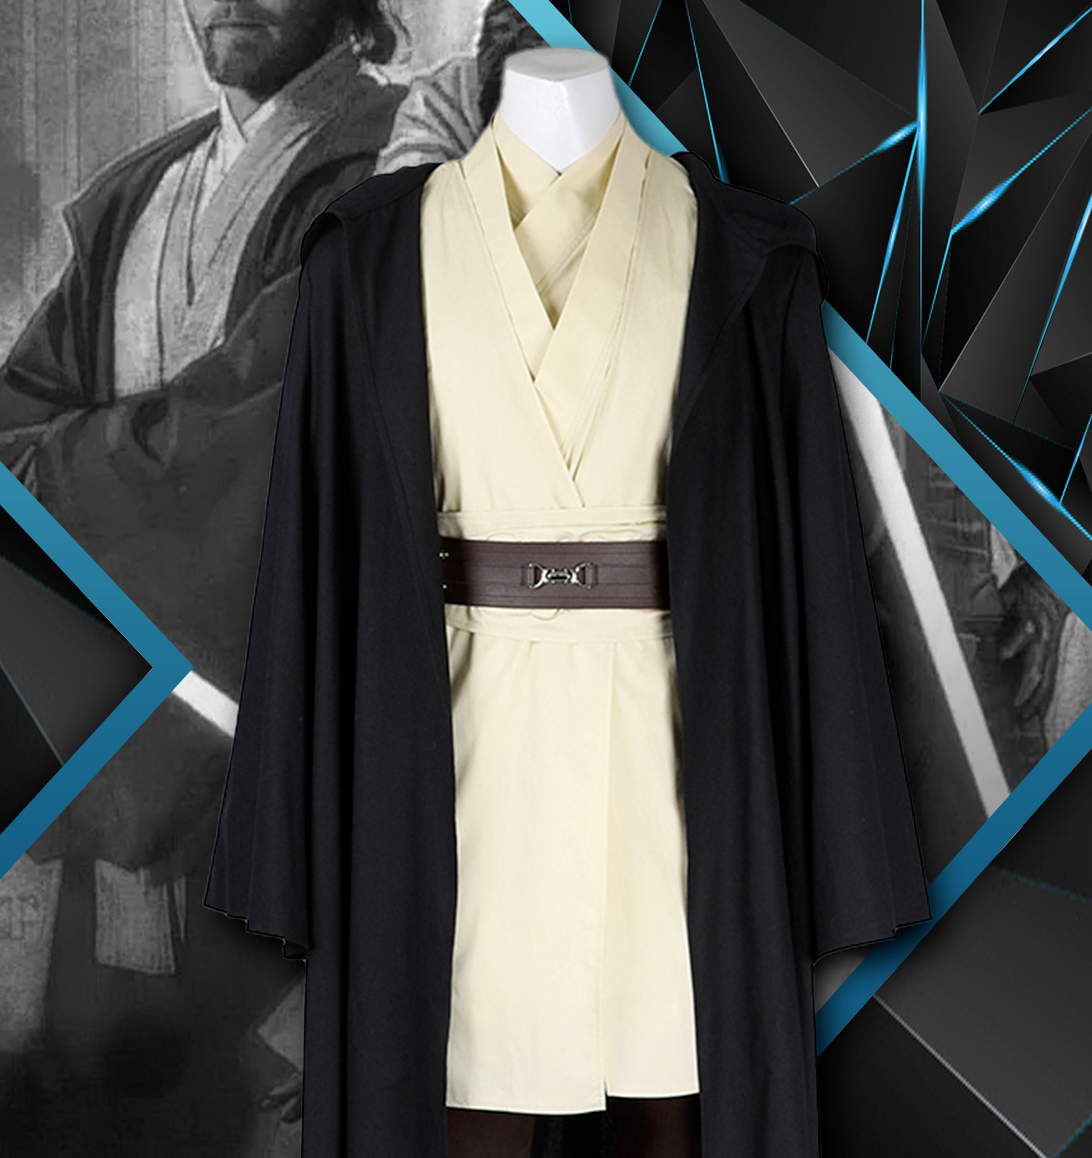 buycco star wars characters cosplay costumes